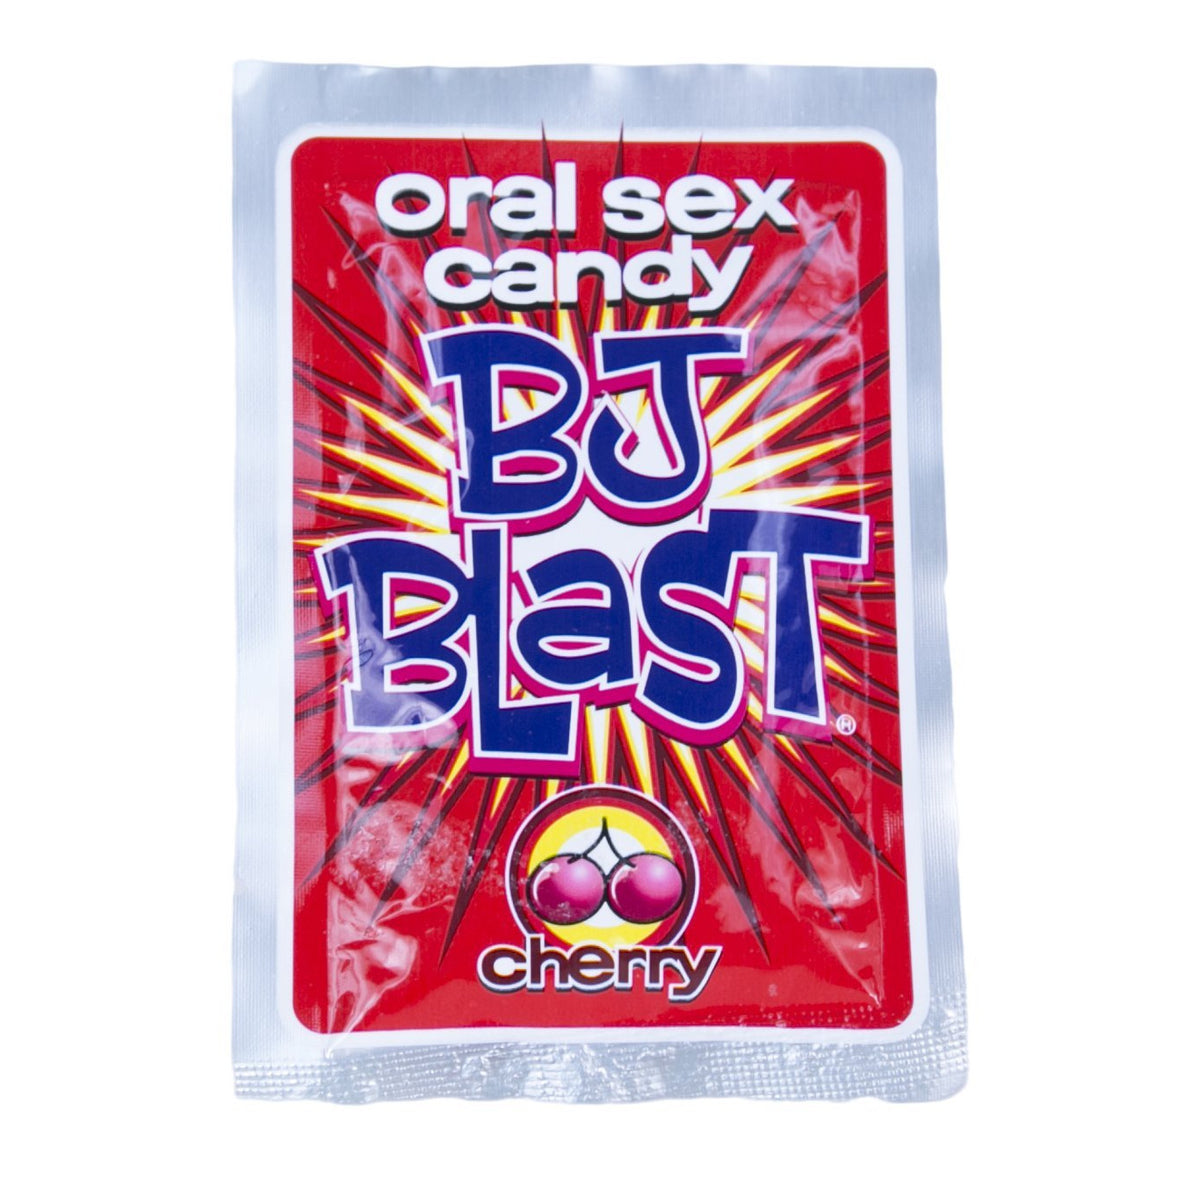 Pipedream Products Bj Blast Oral Sex Candy Display Bms Enterprises 2279